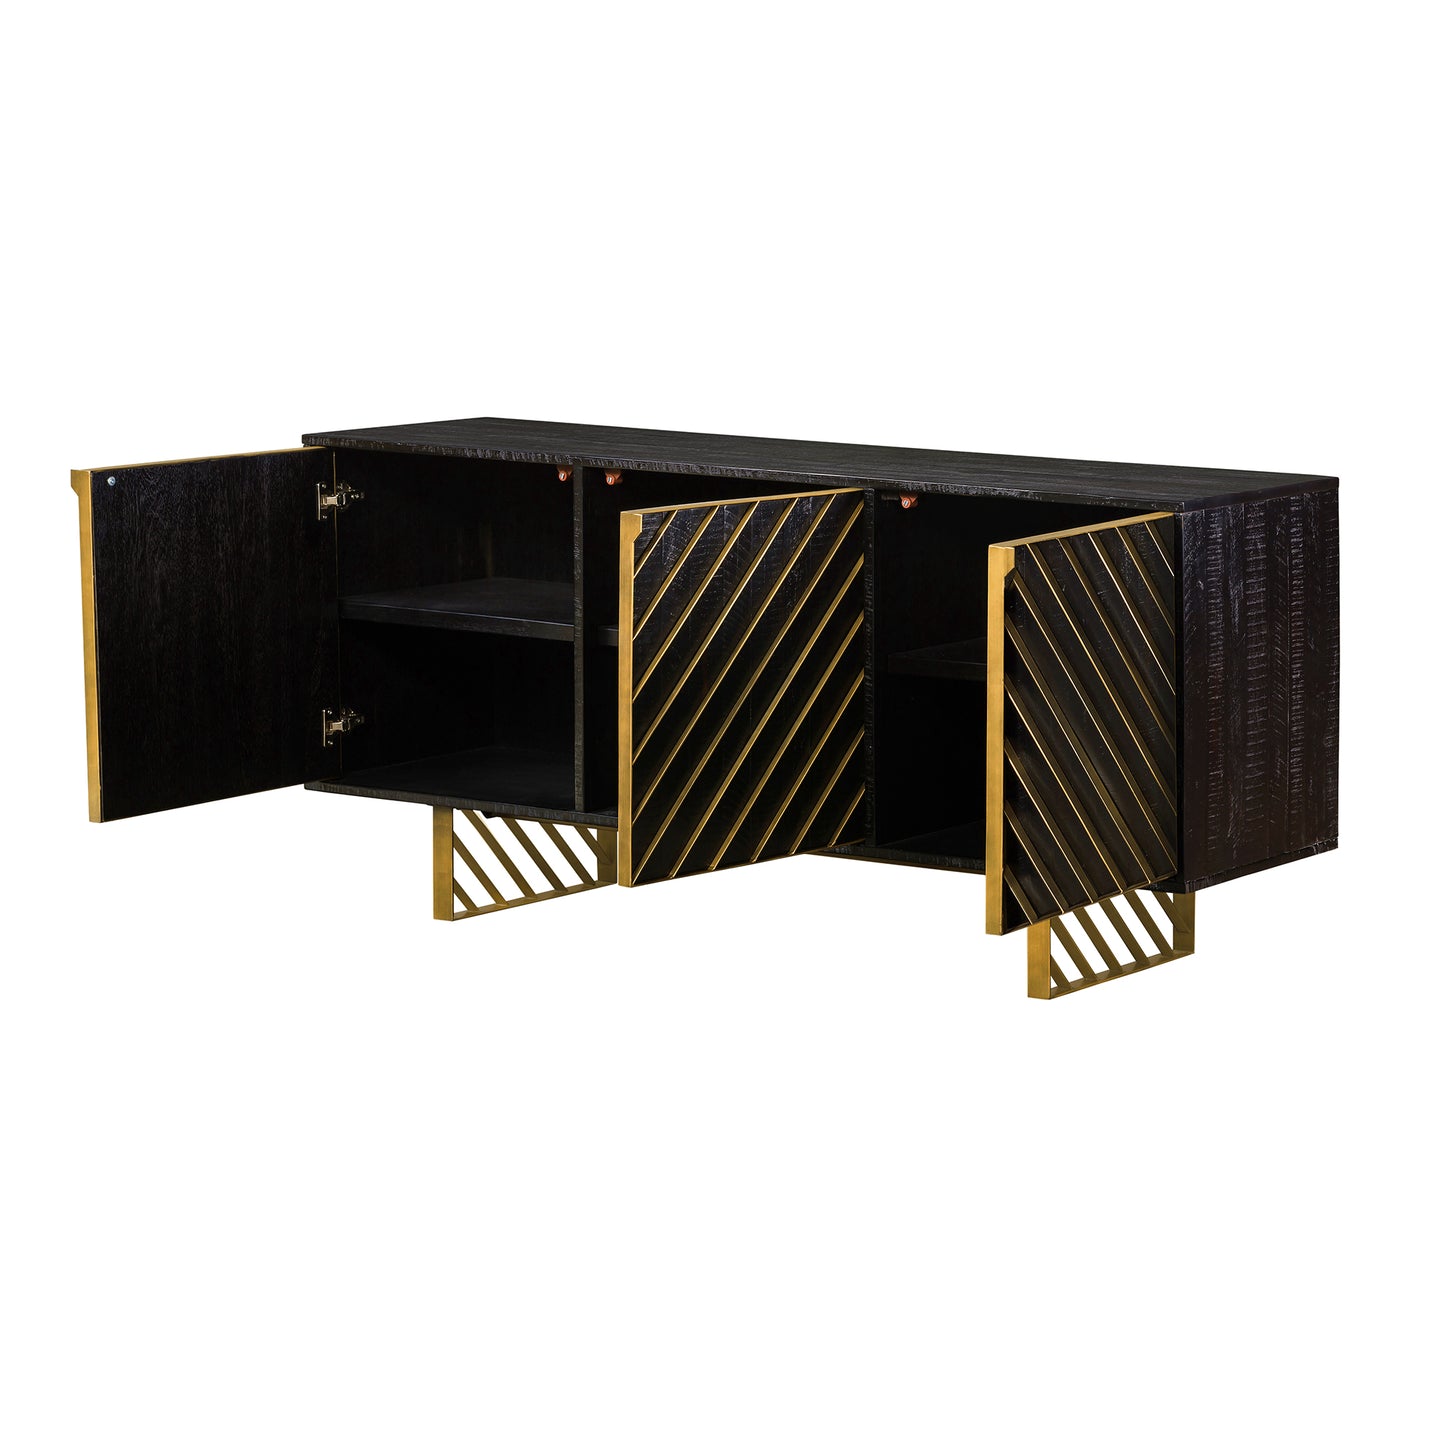 Monaco Rectangular Black Wood Sideboard with Antique Brass Accent